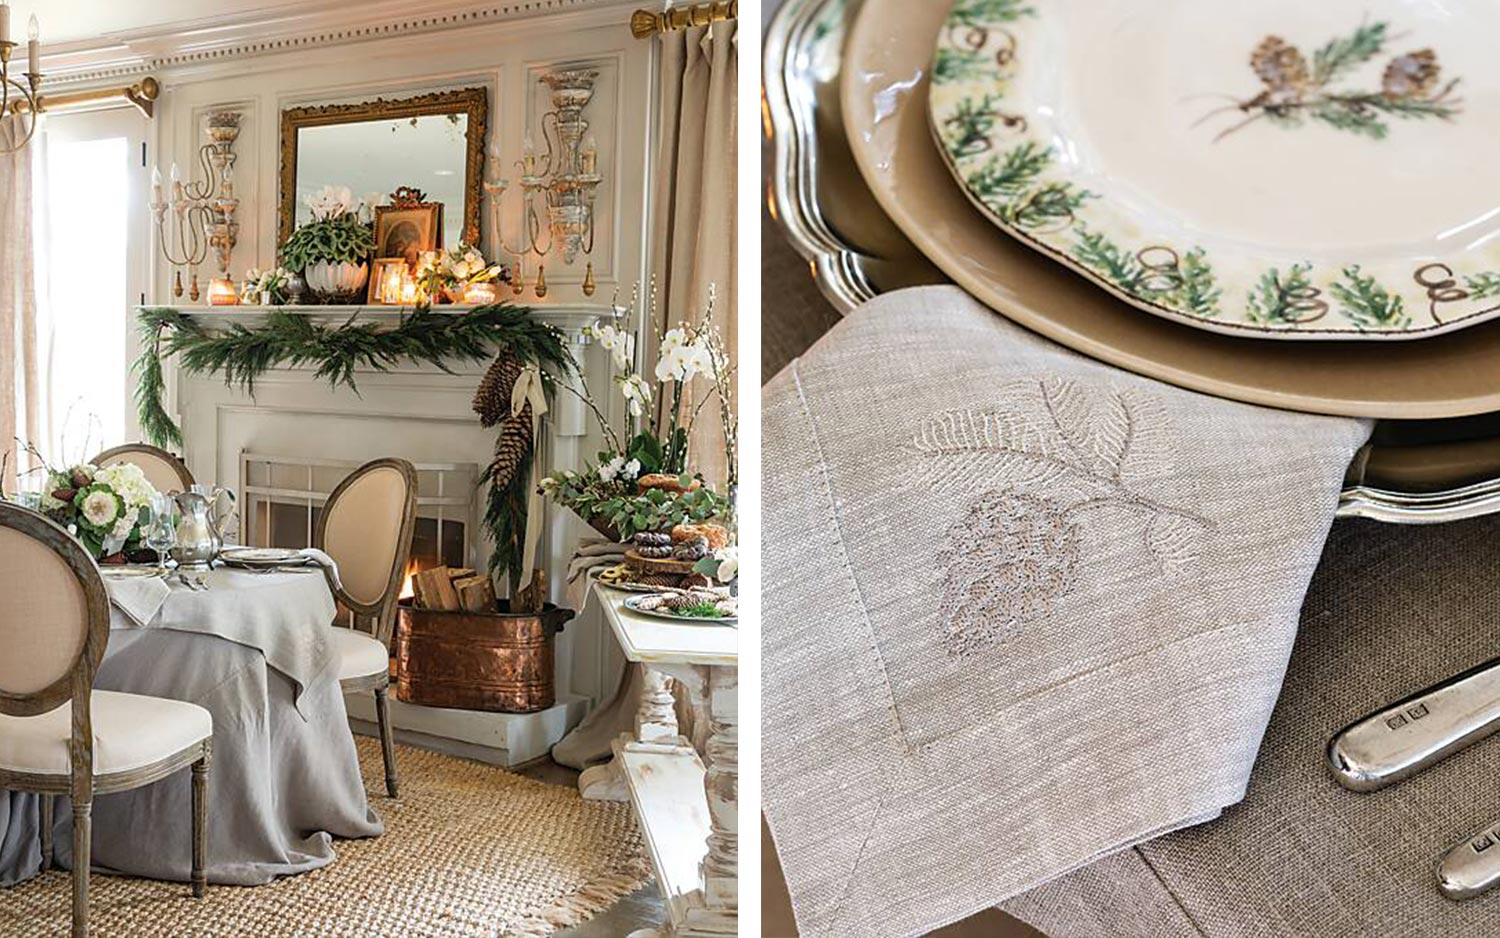 Set a Welcoming Wintry Table by the Fire